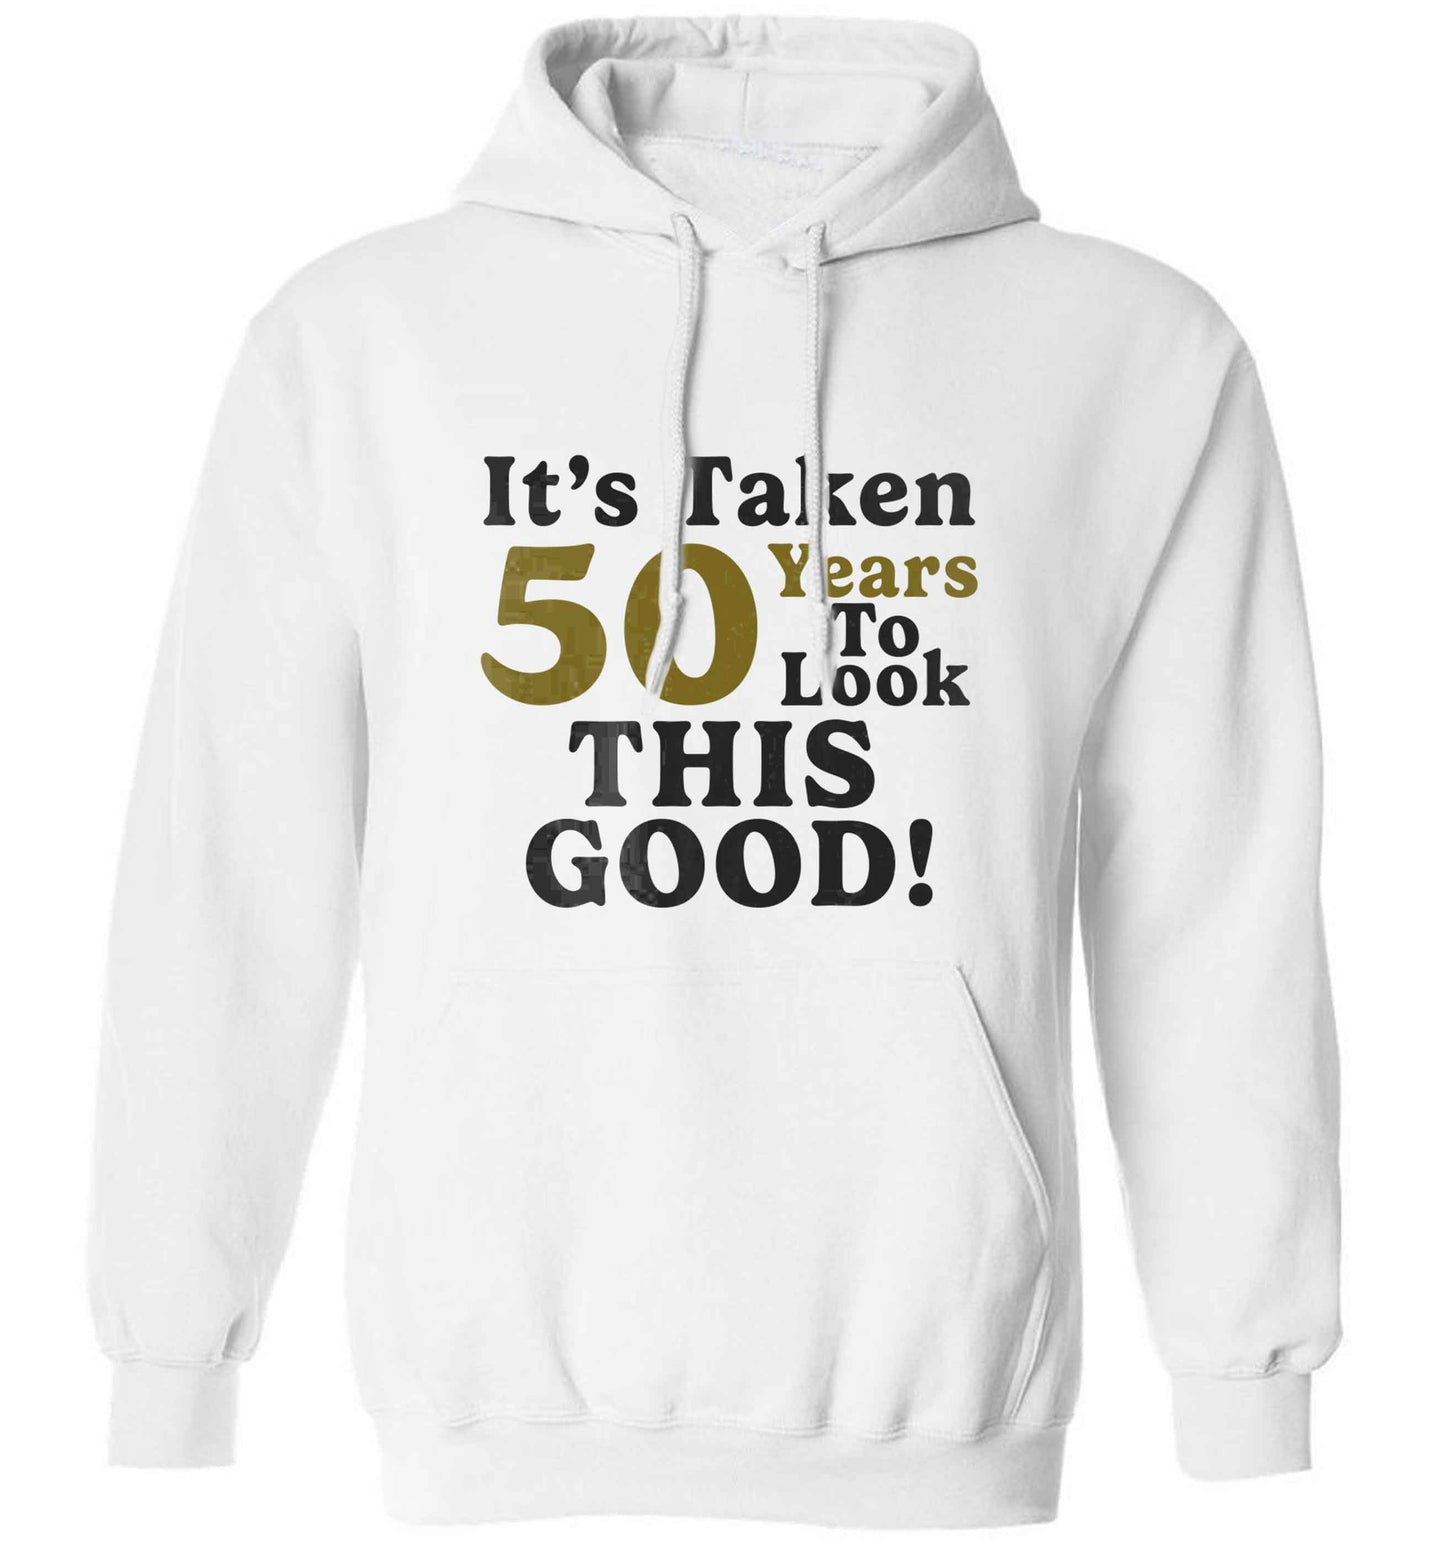 It's taken 50 years to look this good! adults unisex white hoodie 2XL